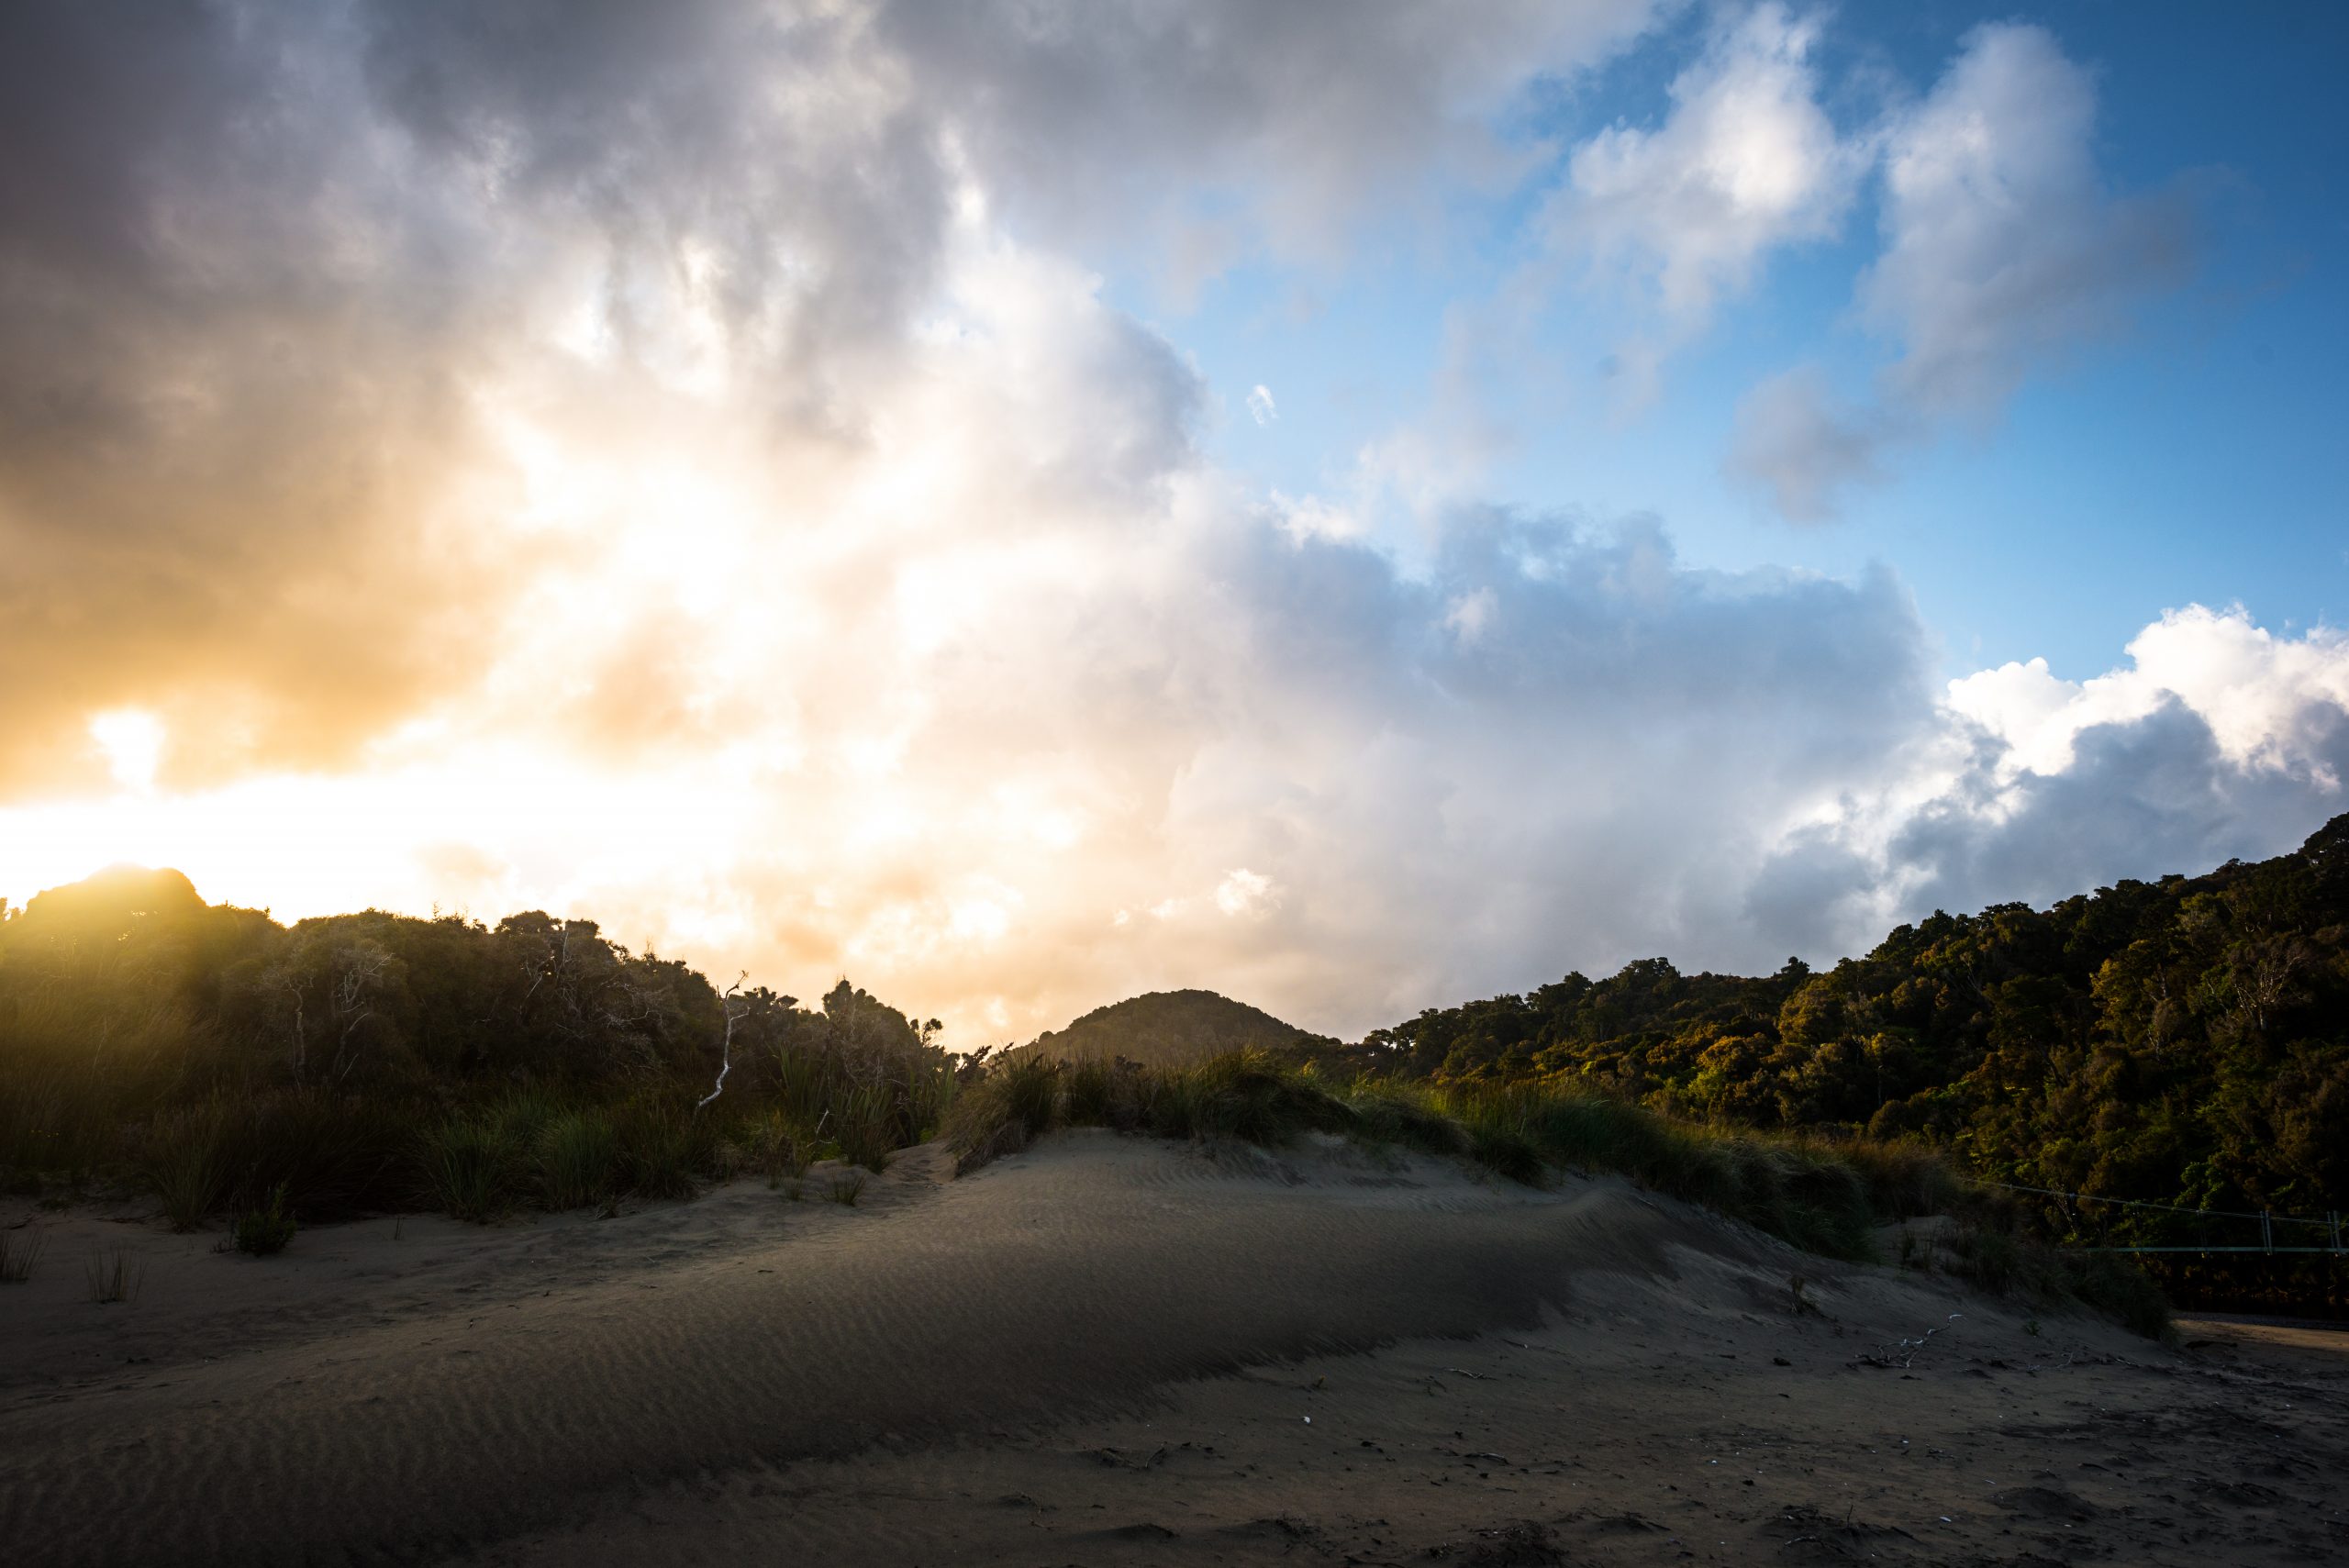 Looking up a sandy hill in New Zealand towards a cloud filled glowing sky